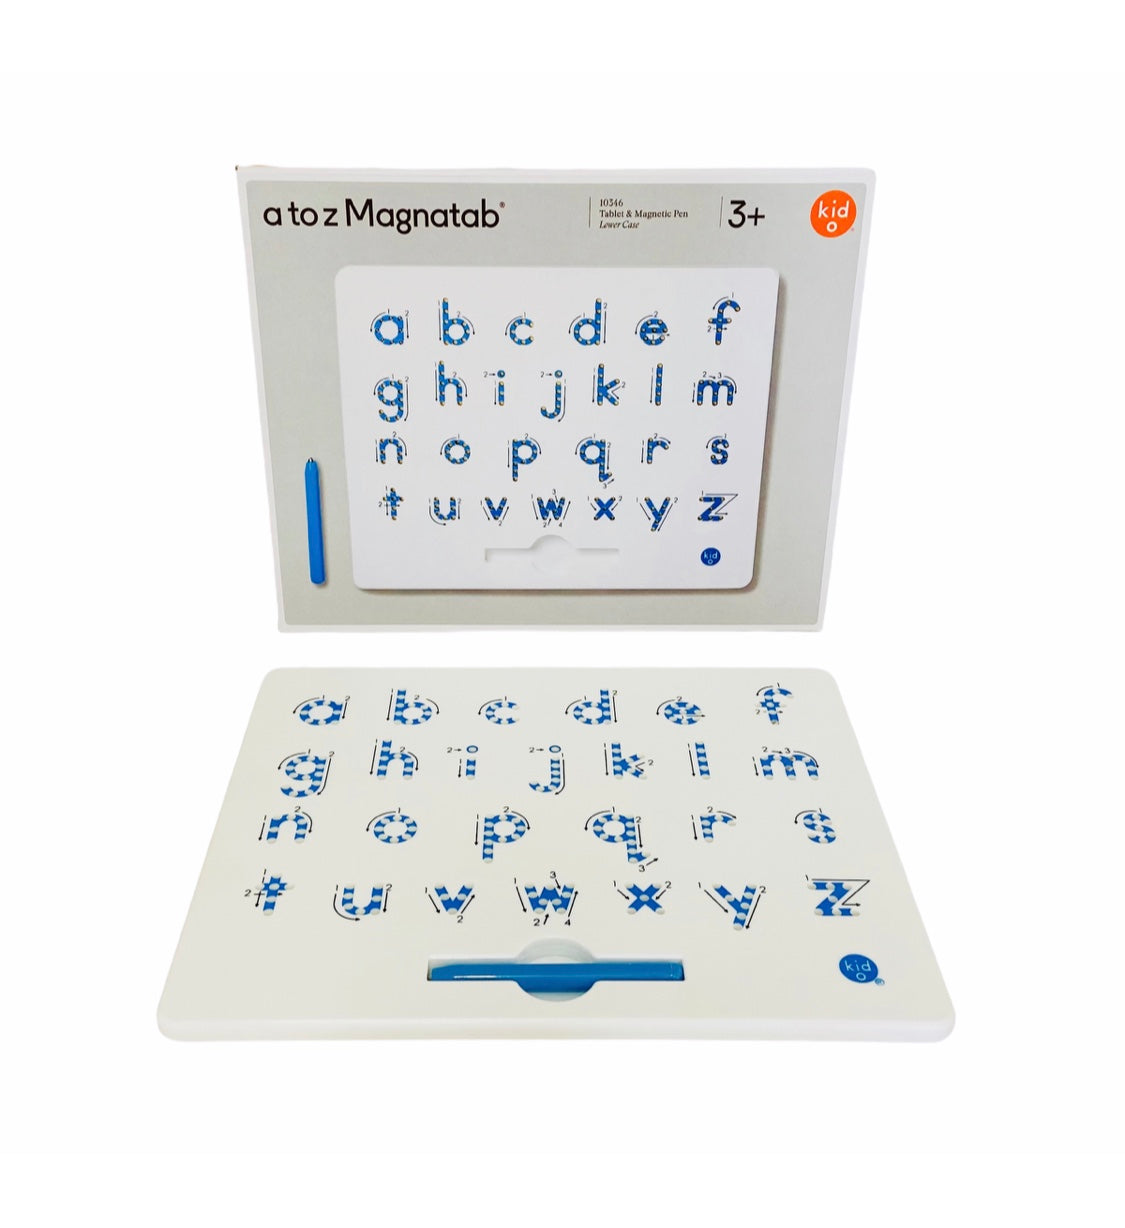 Magnatab a to z - Lower Case on display with the magnatab in front of box